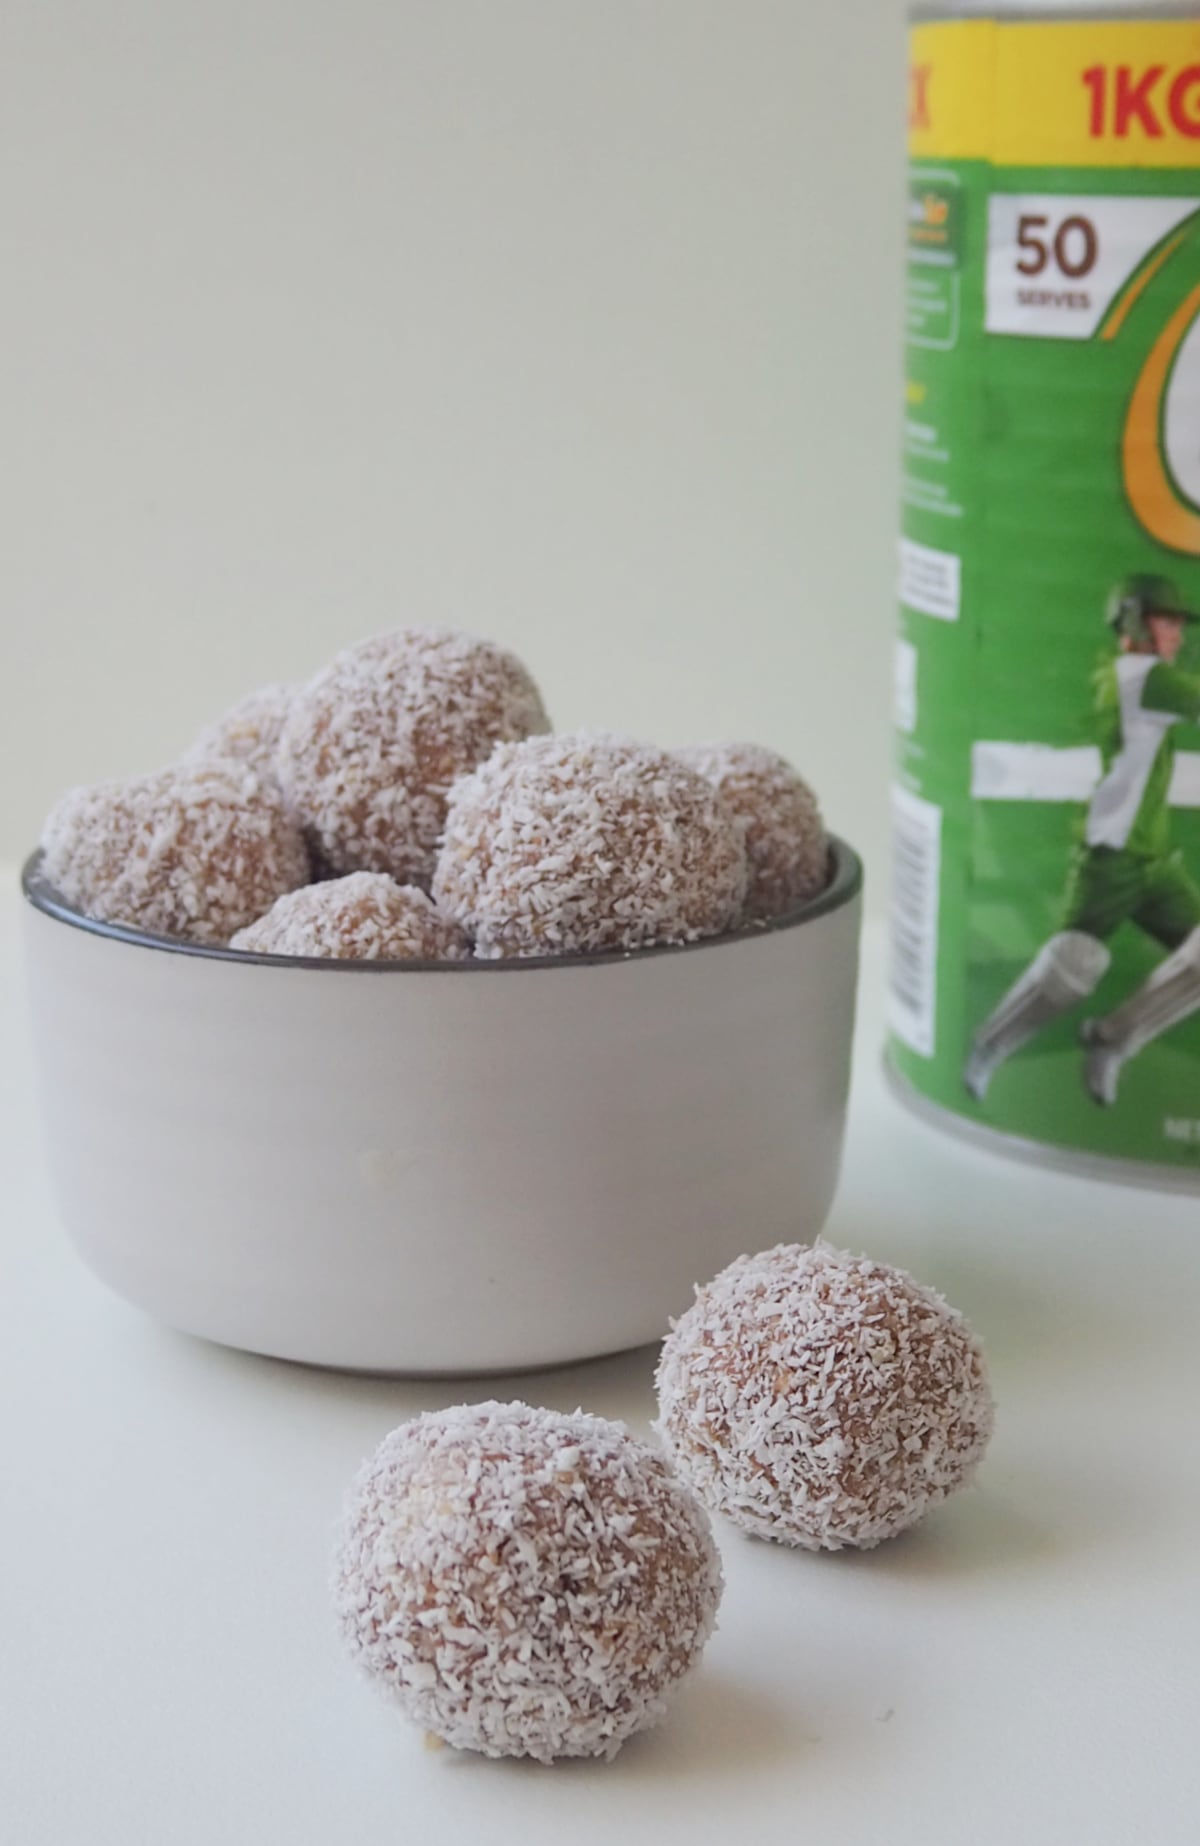 Two Milo Balls on a white surface. In the background is a white bowl with more Milo Balls and a tin of Milo.